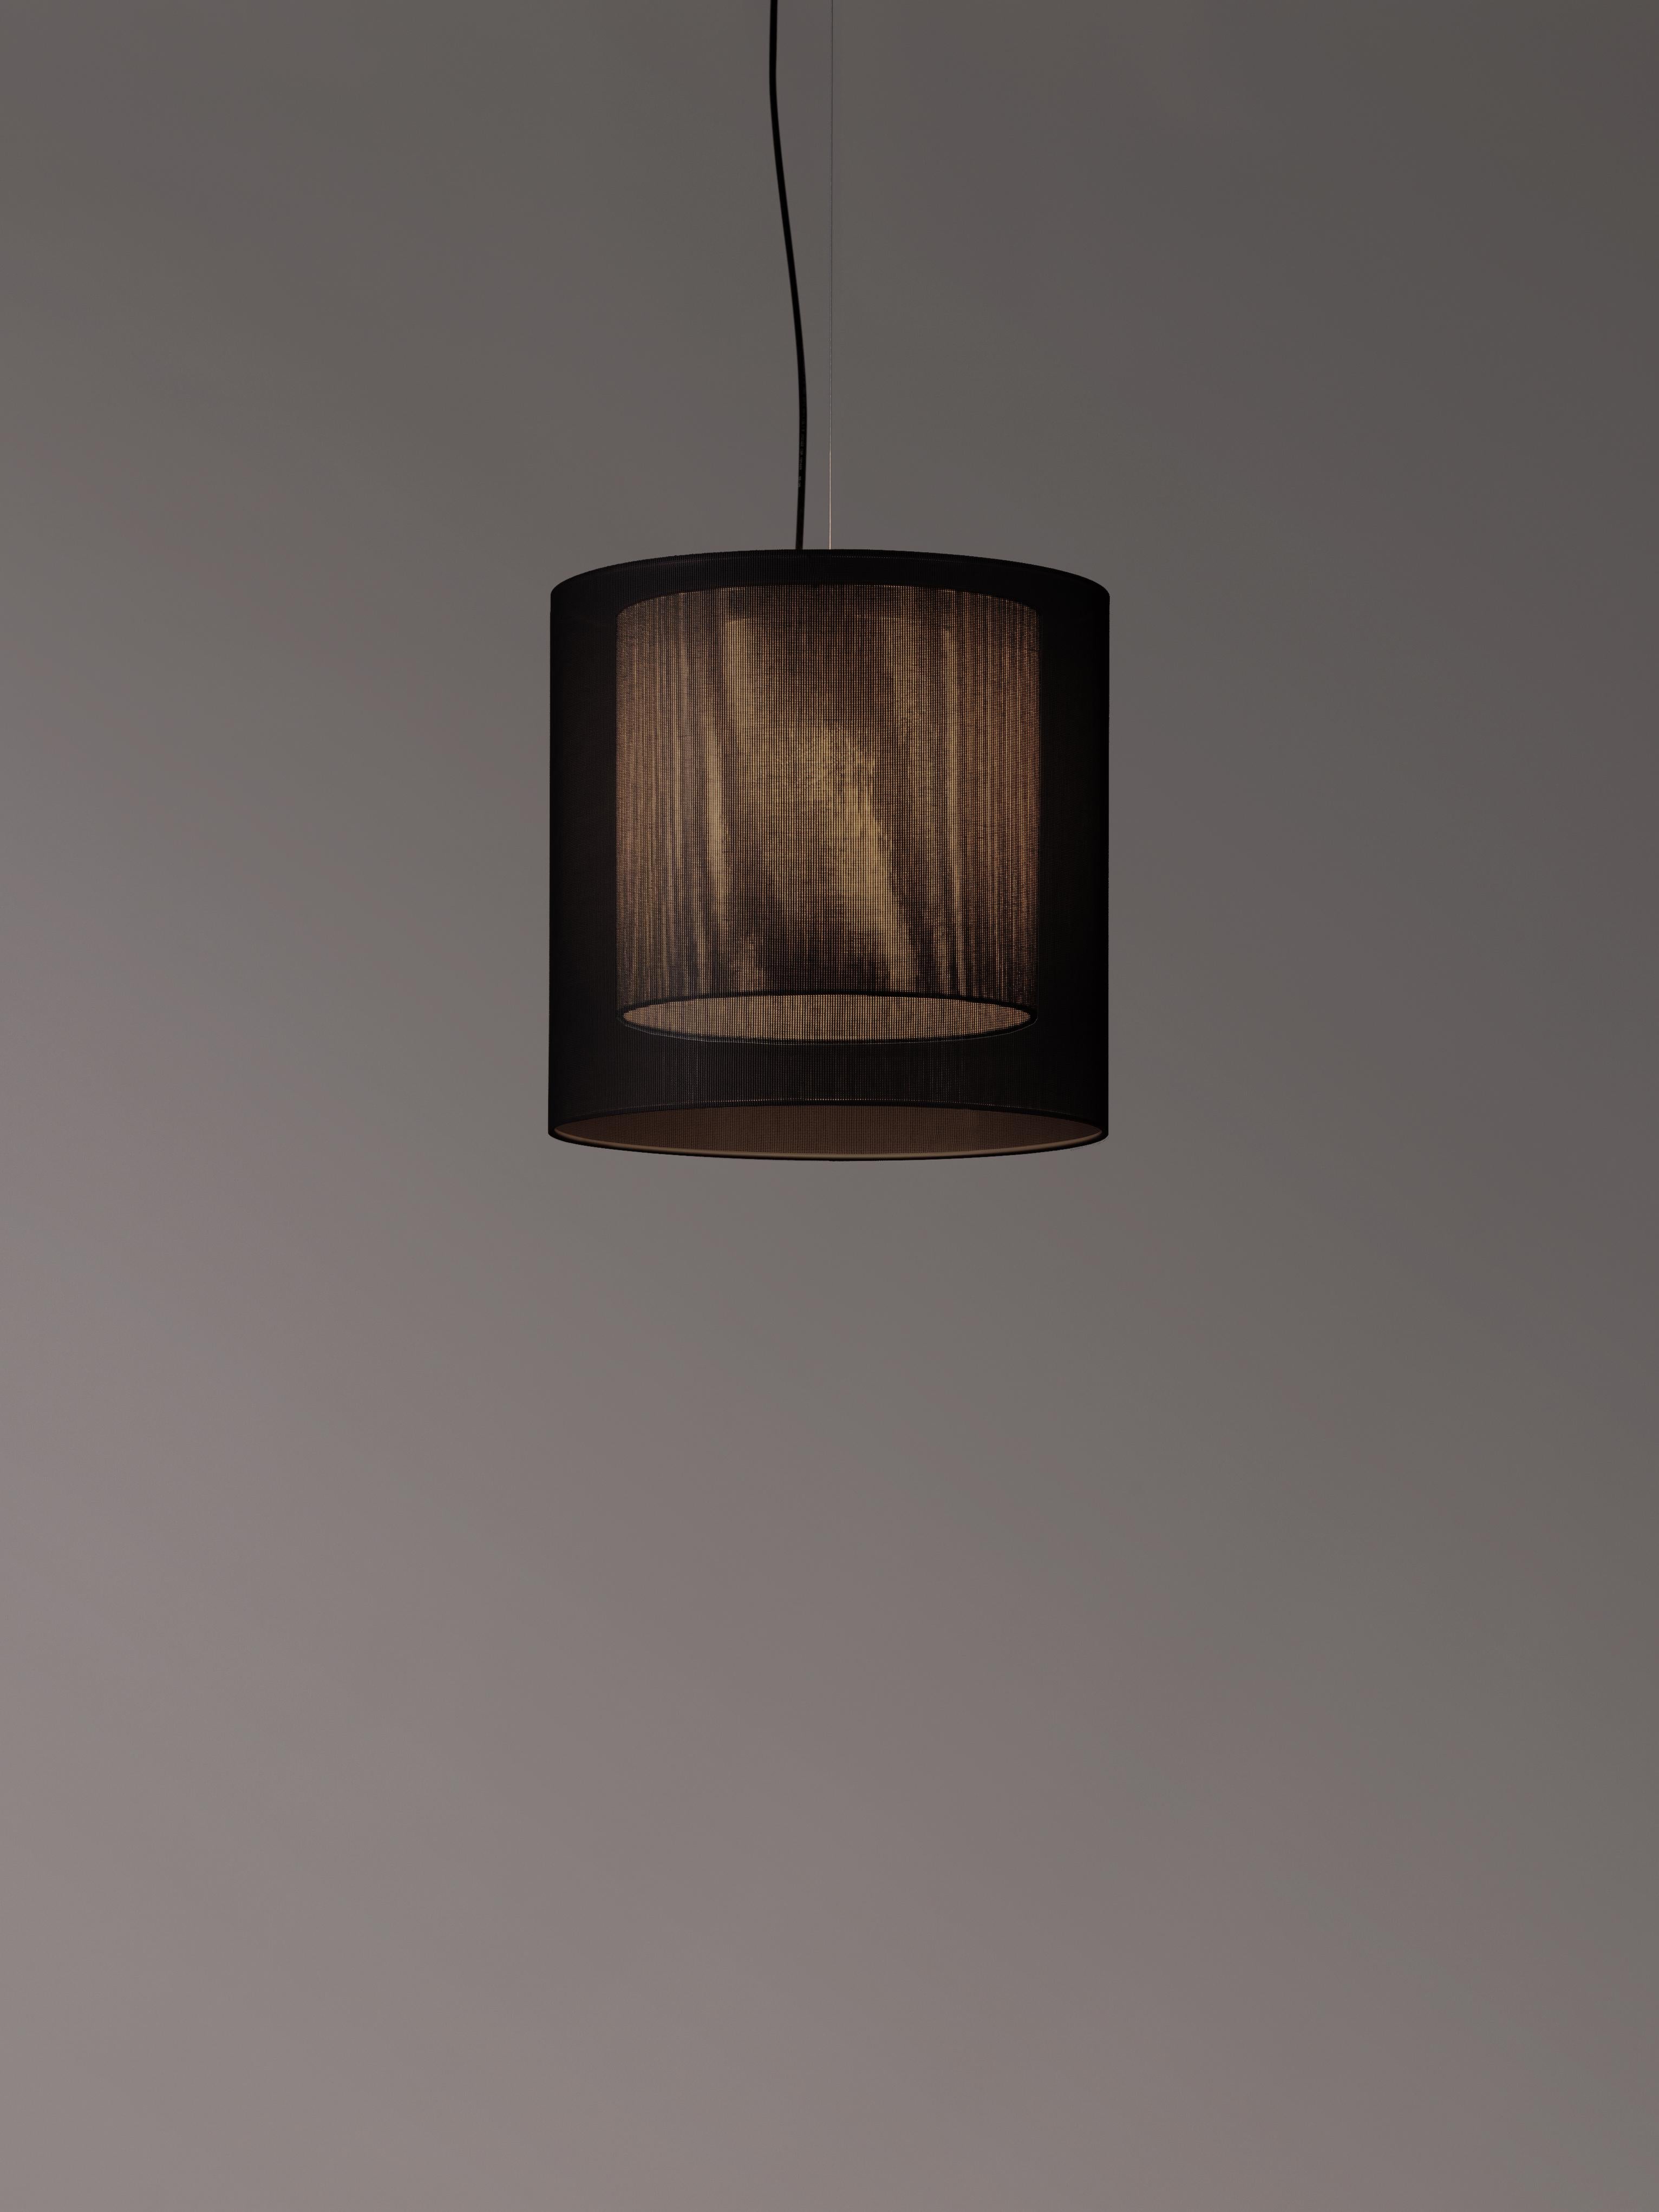 Black and grey Moaré MS pendant lamp by Antoni Arola
Dimensions: D 46 x H 45 cm
Materials: Metal, polyester.
Available in other colors and sizes.

Moaré’s multiple combinations of formats and colours make it highly versatile. The series takes